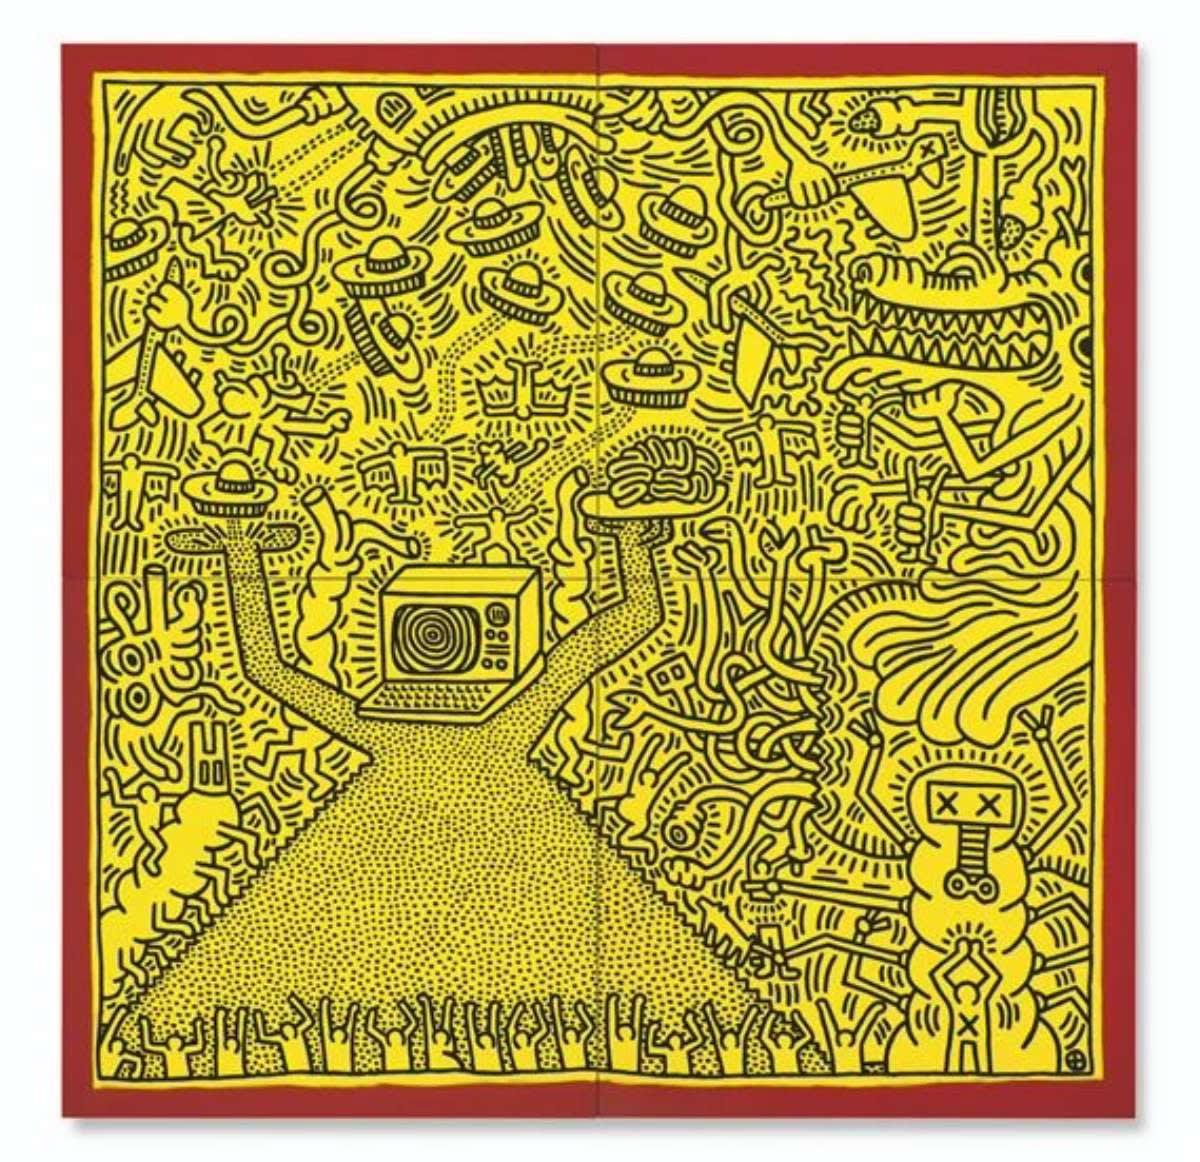 Untitled Keith Haring © 1984